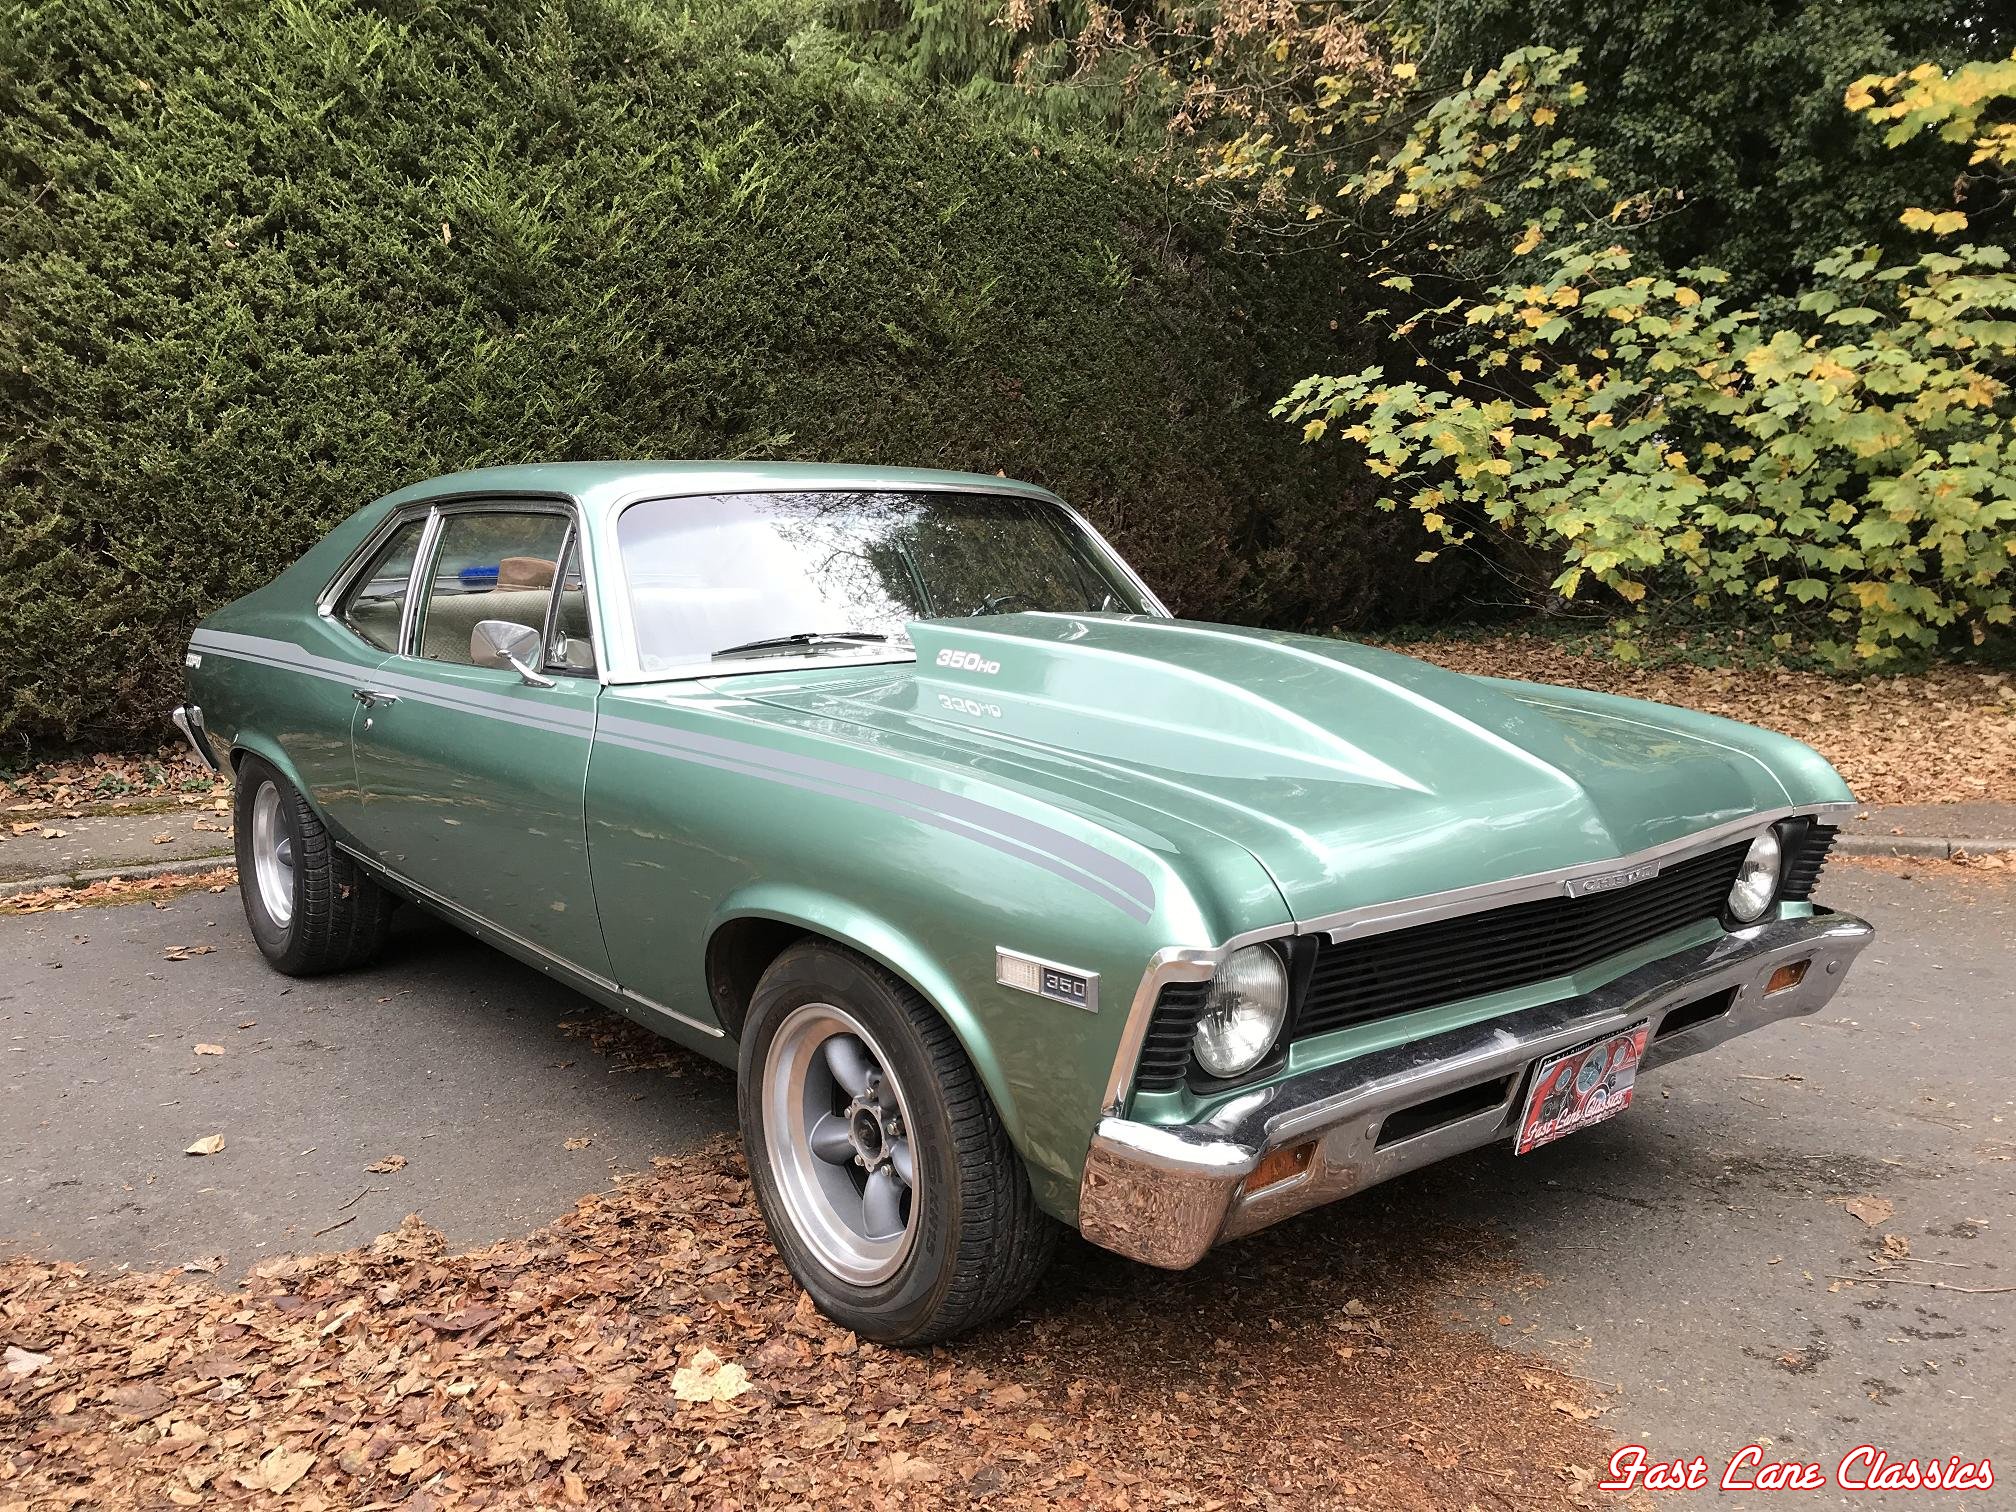 1968 Chevrolet Nova Coupe For Sale By Fast Lane Classics